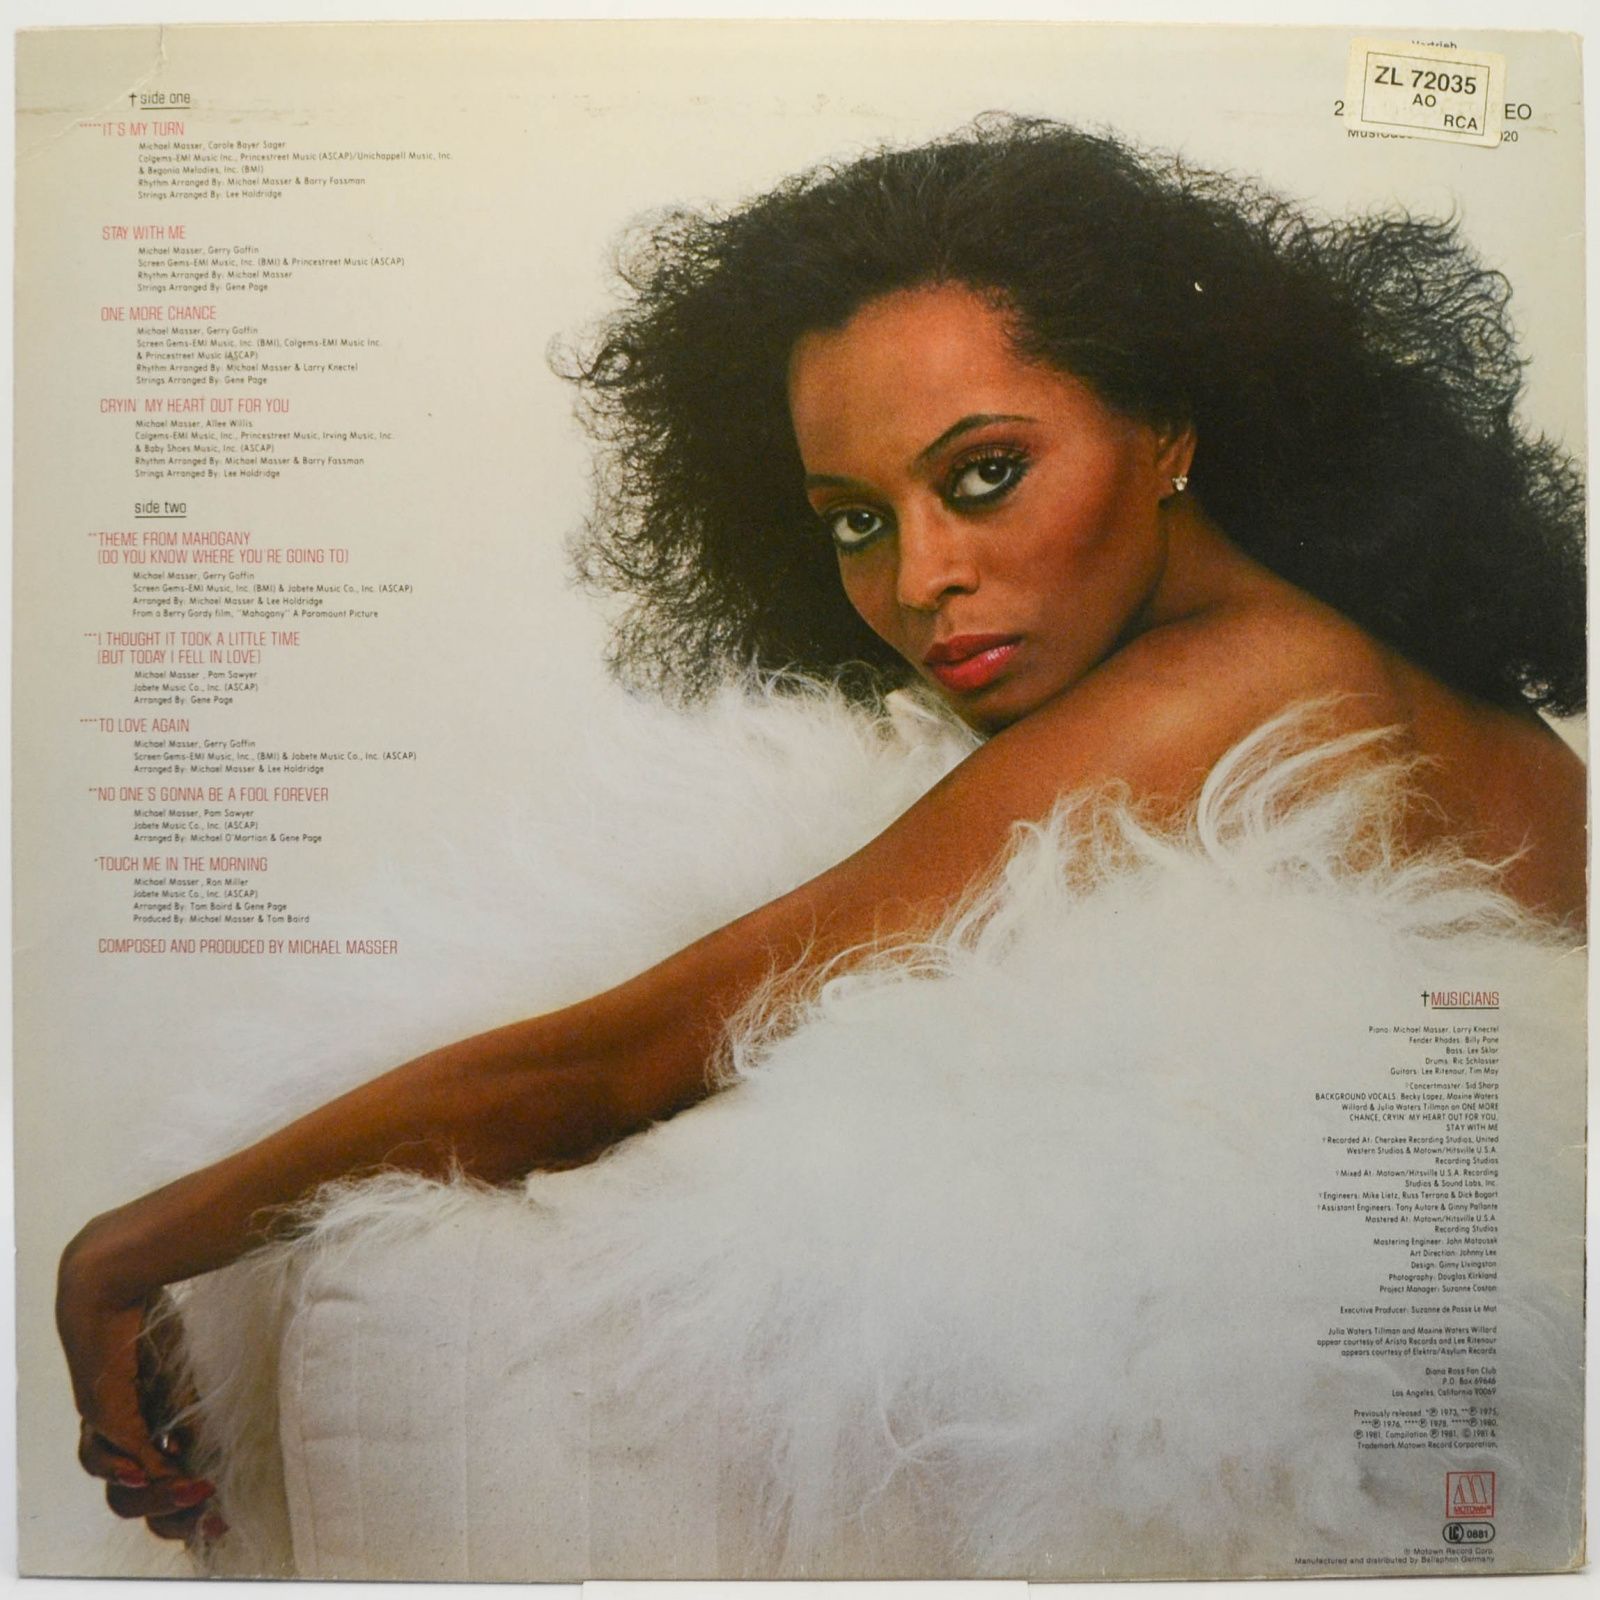 Diana Ross — To Love Again, 1981